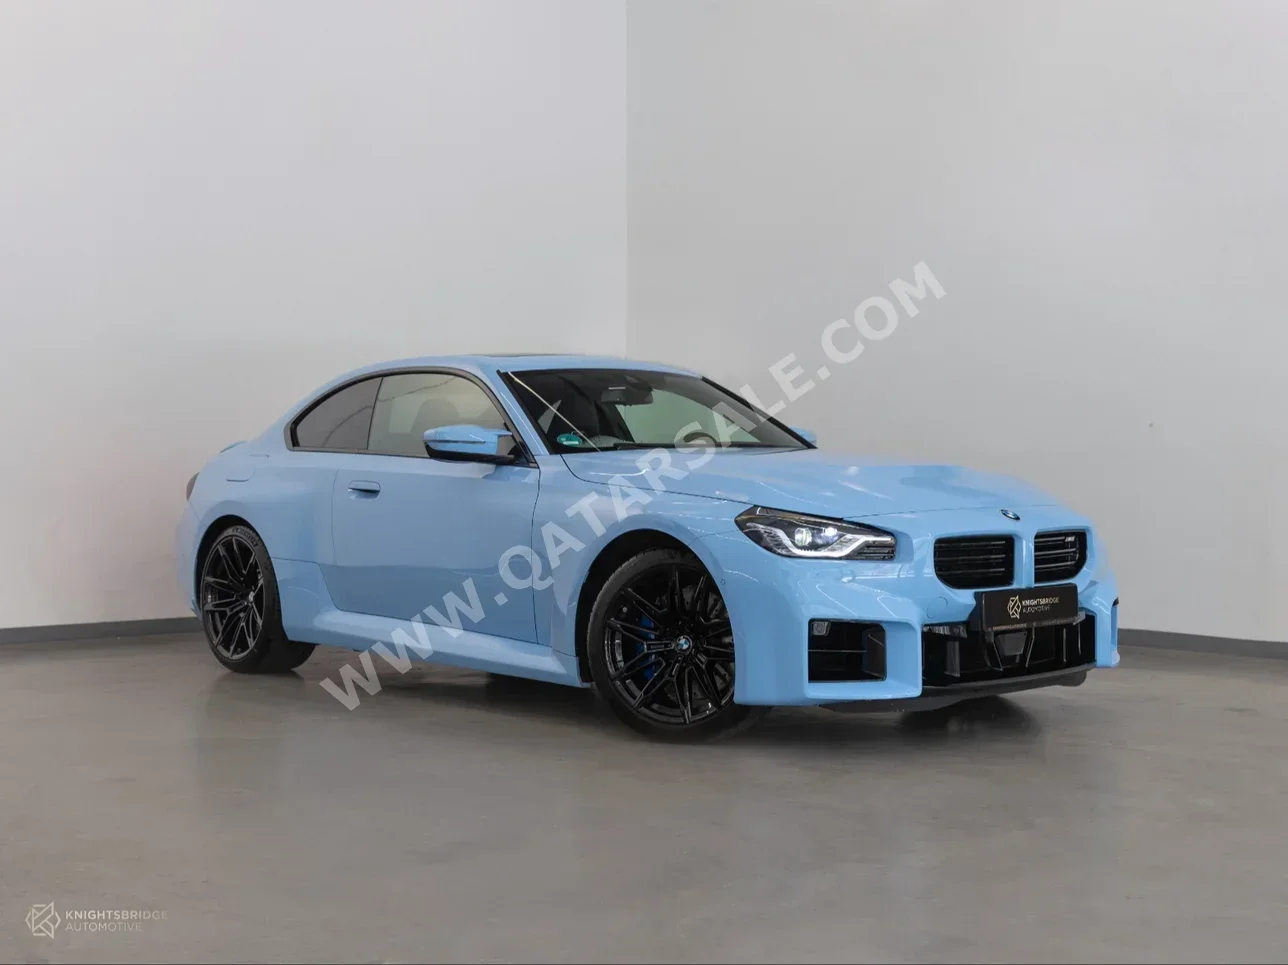 BMW  M-Series  2  2023  Automatic  4,200 Km  6 Cylinder  Rear Wheel Drive (RWD)  Coupe / Sport  Blue  With Warranty